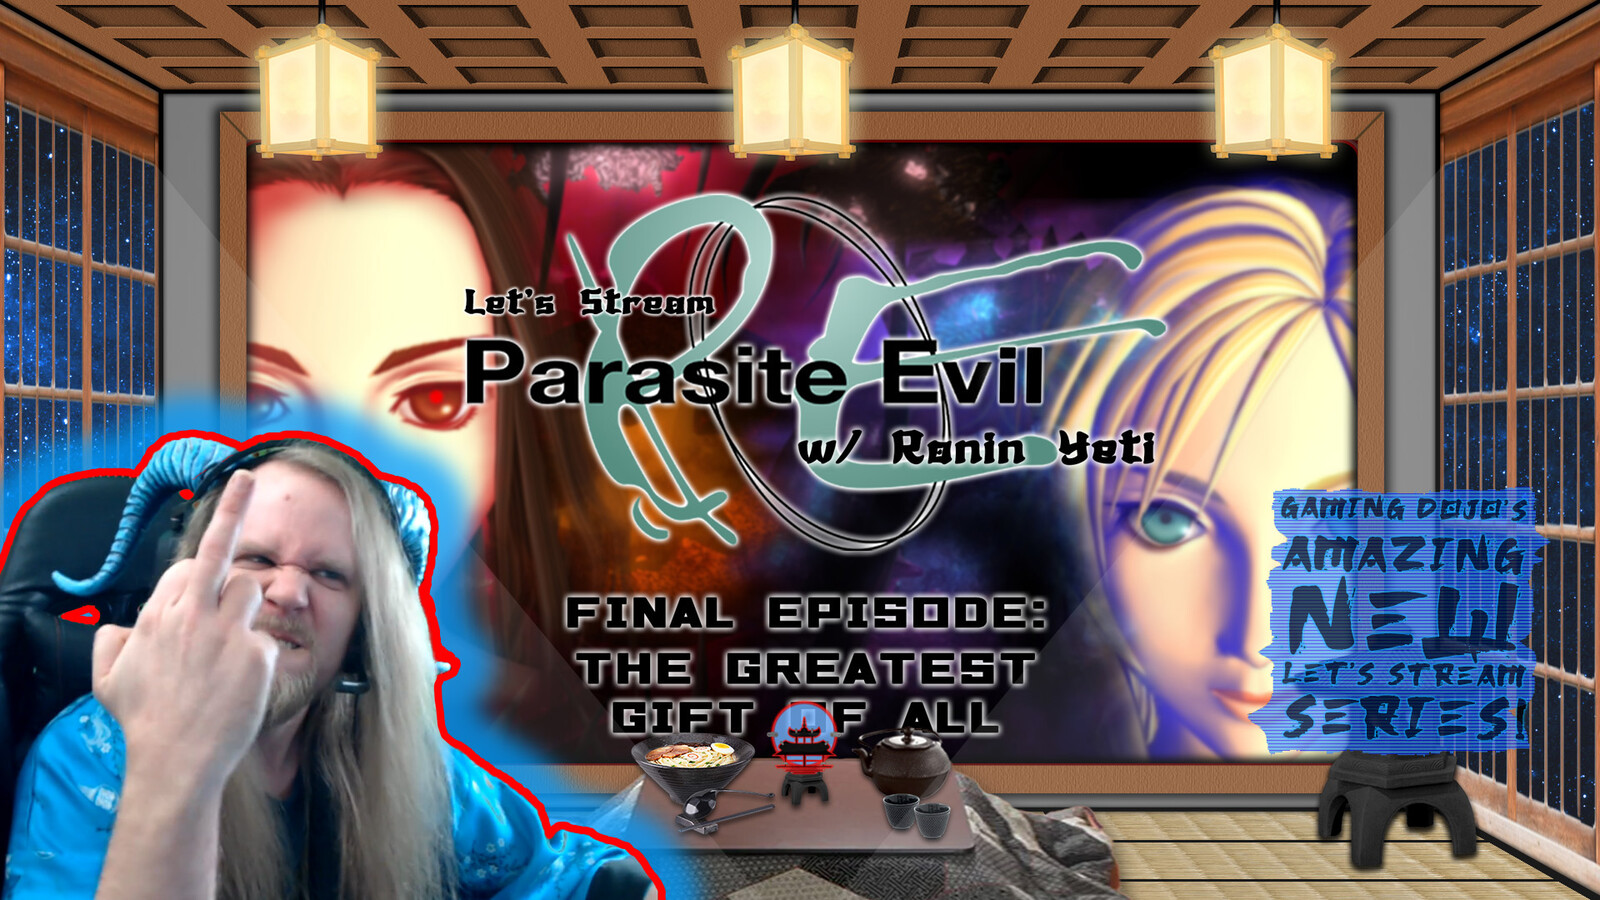 Let's Stream "Parasite Evil" Final Episode Image | Ronin Yeti Twitch Streaming